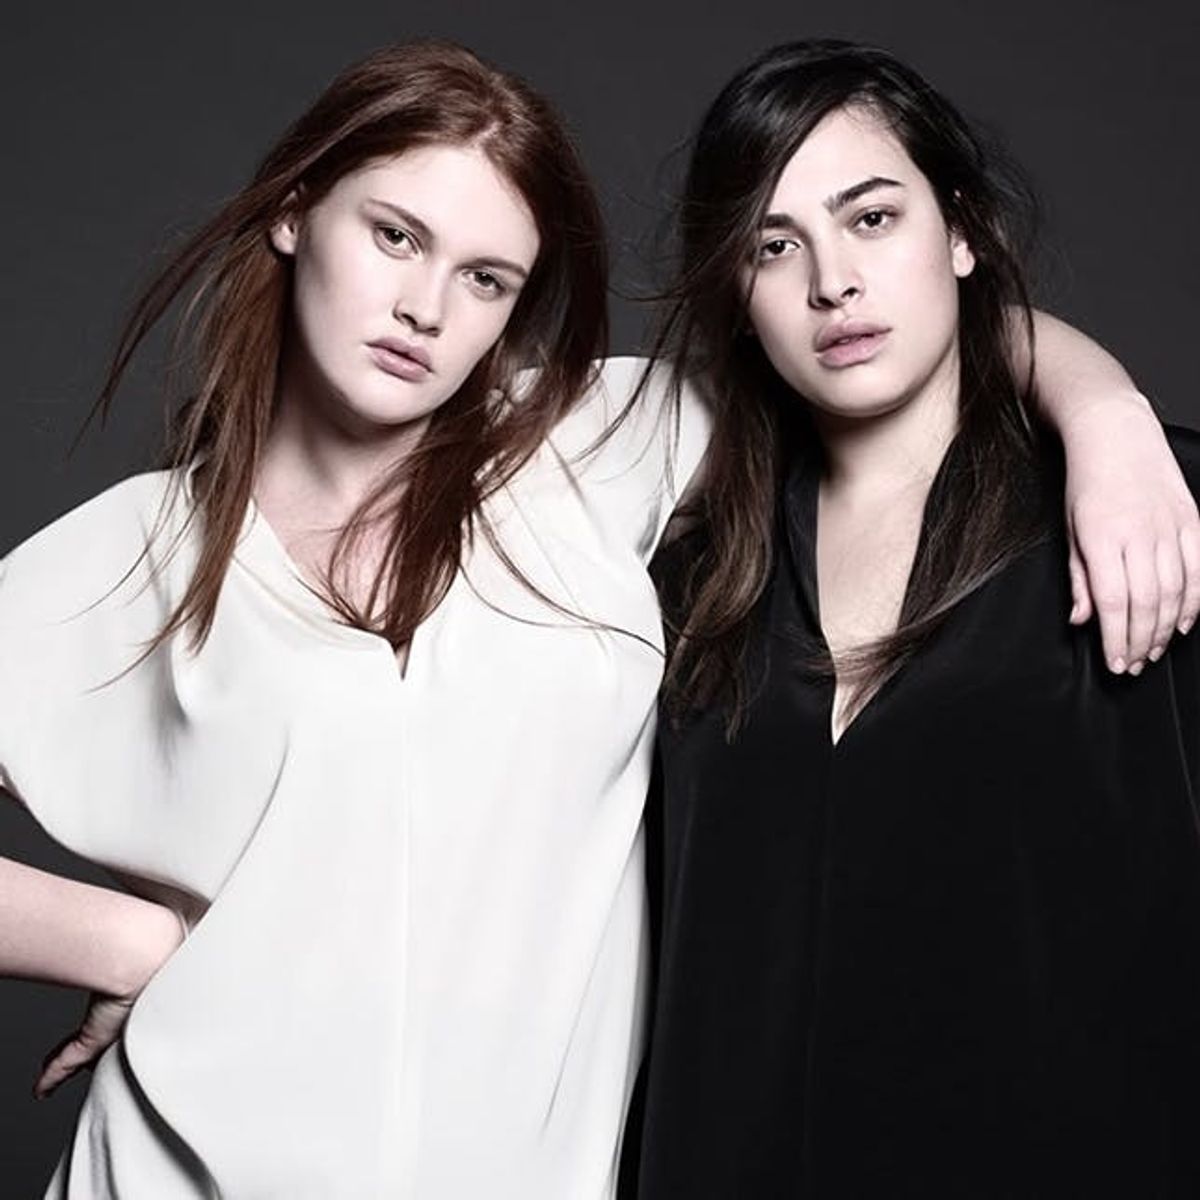 This Is the Minimalist Plus-Size Fashion Line You’ve Been Waiting For